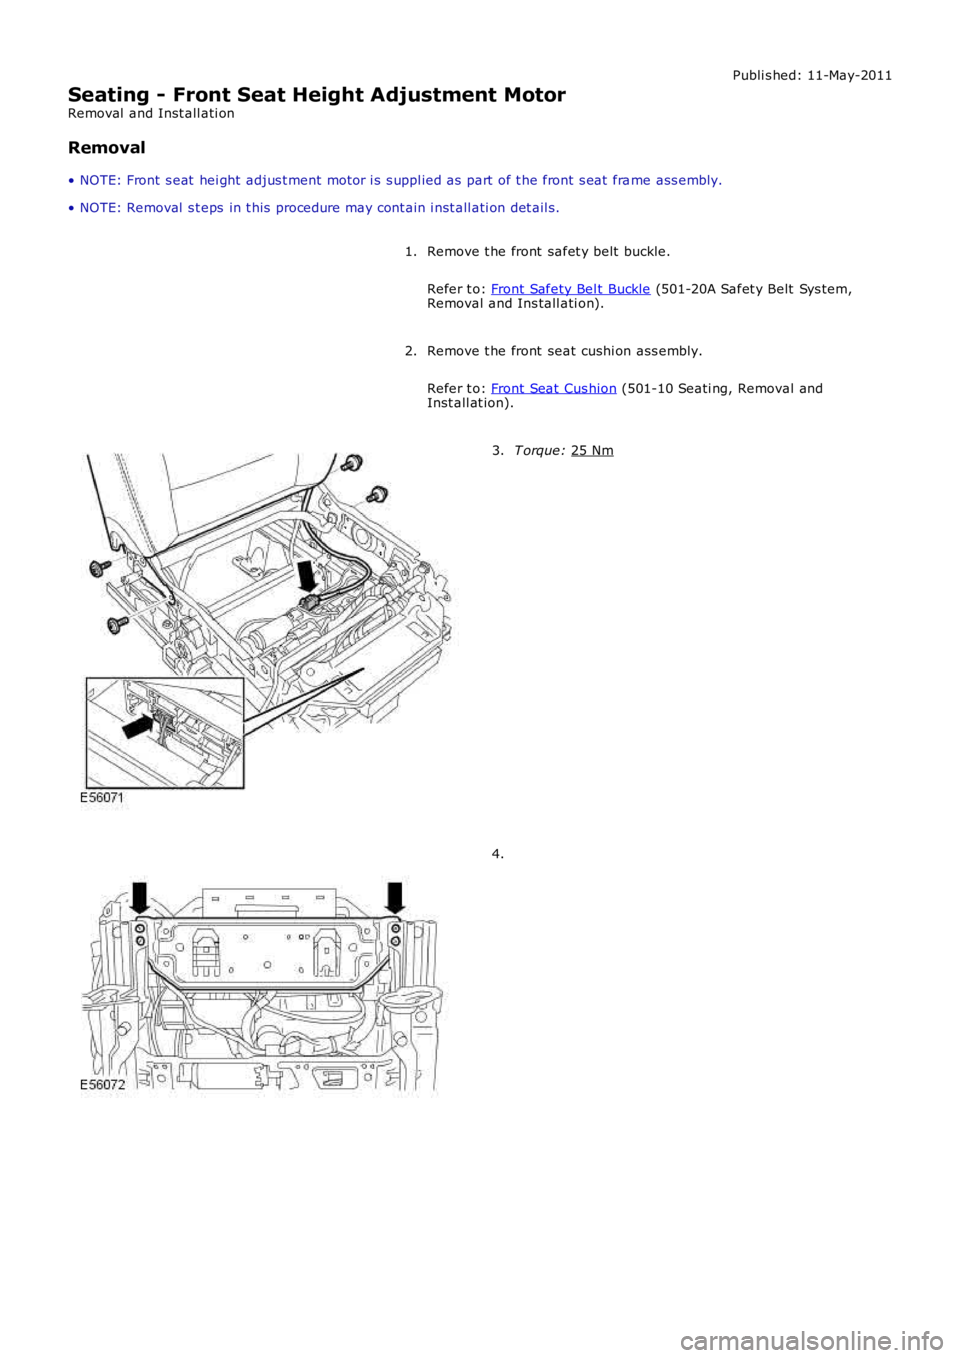 LAND ROVER FRELANDER 2 2006  Repair Manual Publi s hed: 11-May-2011
Seating - Front Seat Height Adjustment Motor
Removal  and Inst all ati on
Removal
• NOTE: Front  s eat  hei ght  adjus t ment motor i s s uppl ied as  part  of t he front s 